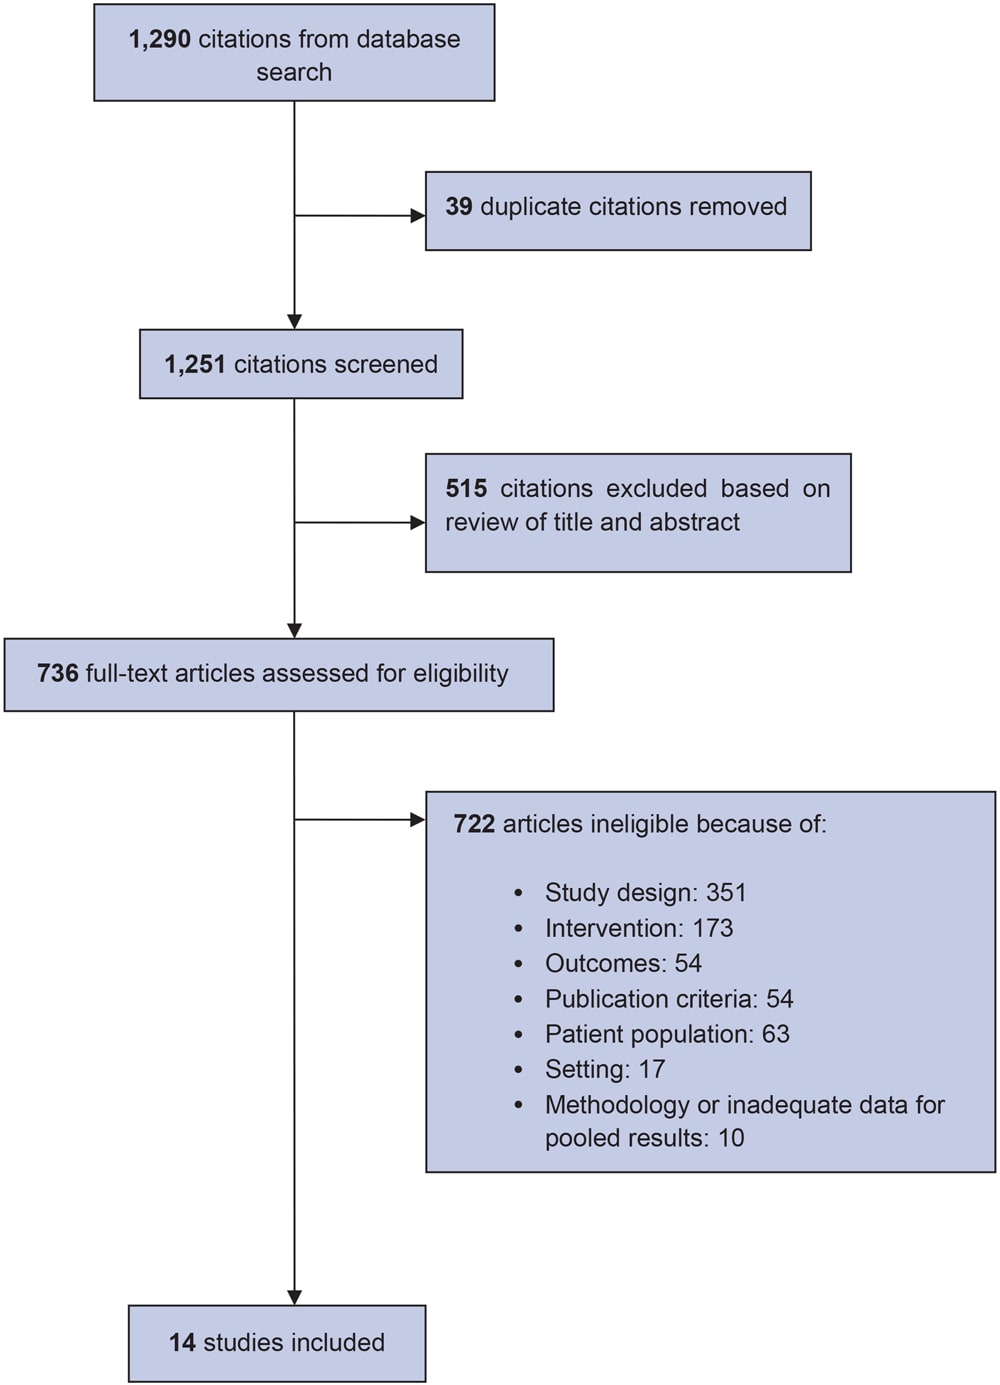 Flowchart of steps in selection of 14 studies for inclusion in a systematic review of weight loss in short-term interventions for physical activity and nutrition among adults with overweight or obesity.